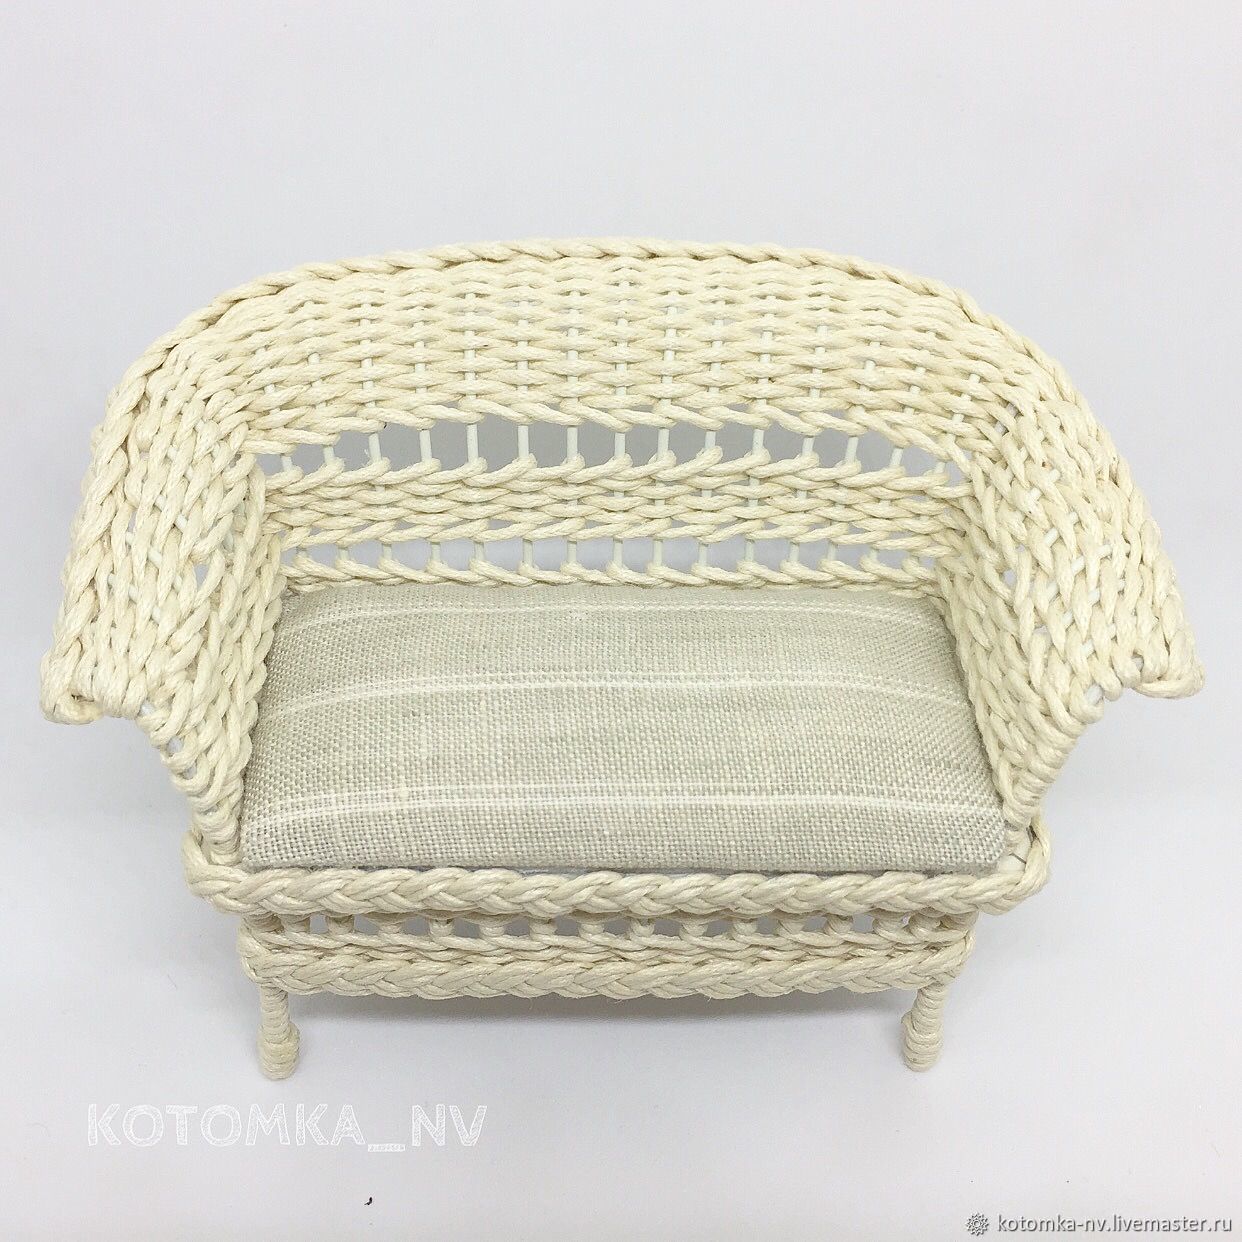 Sofa for dolls - doll house, wicker furniture for dolls, Doll furniture, Moscow,  Фото №1